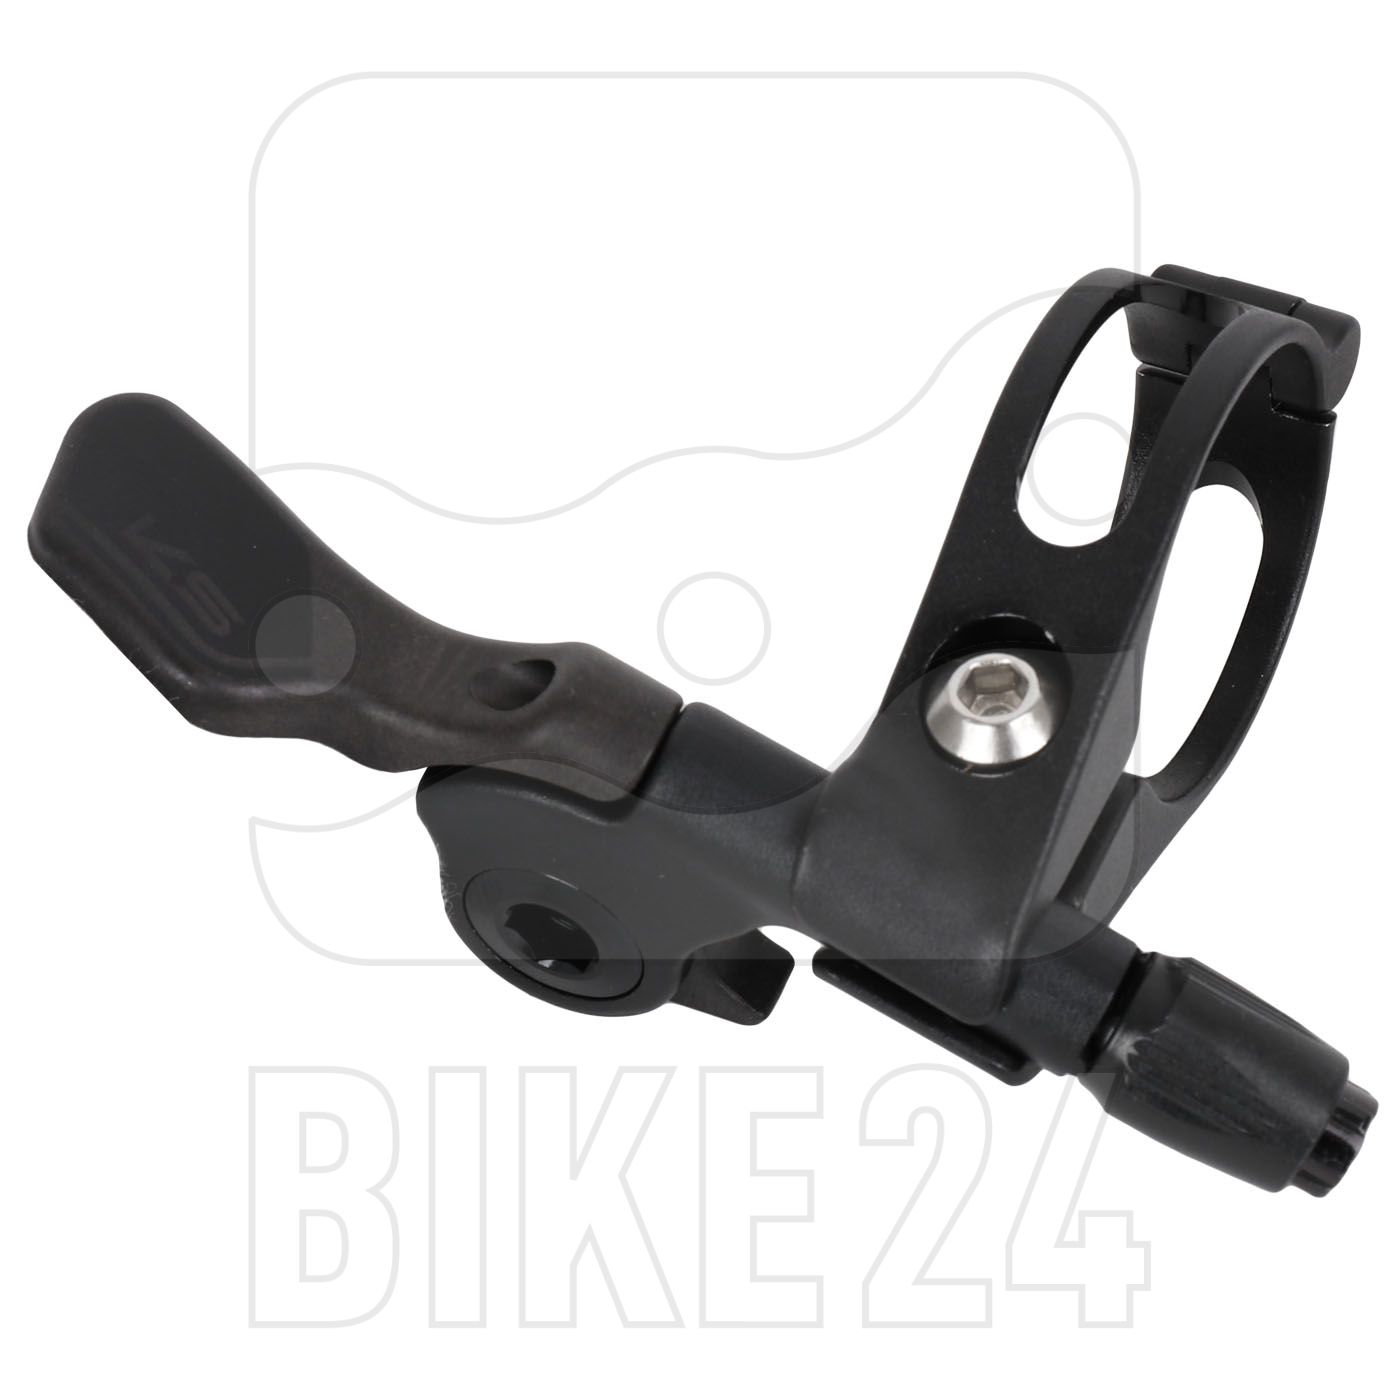 Picture of KS Southpaw Carbon Remote - for 31.8mm bar clamp